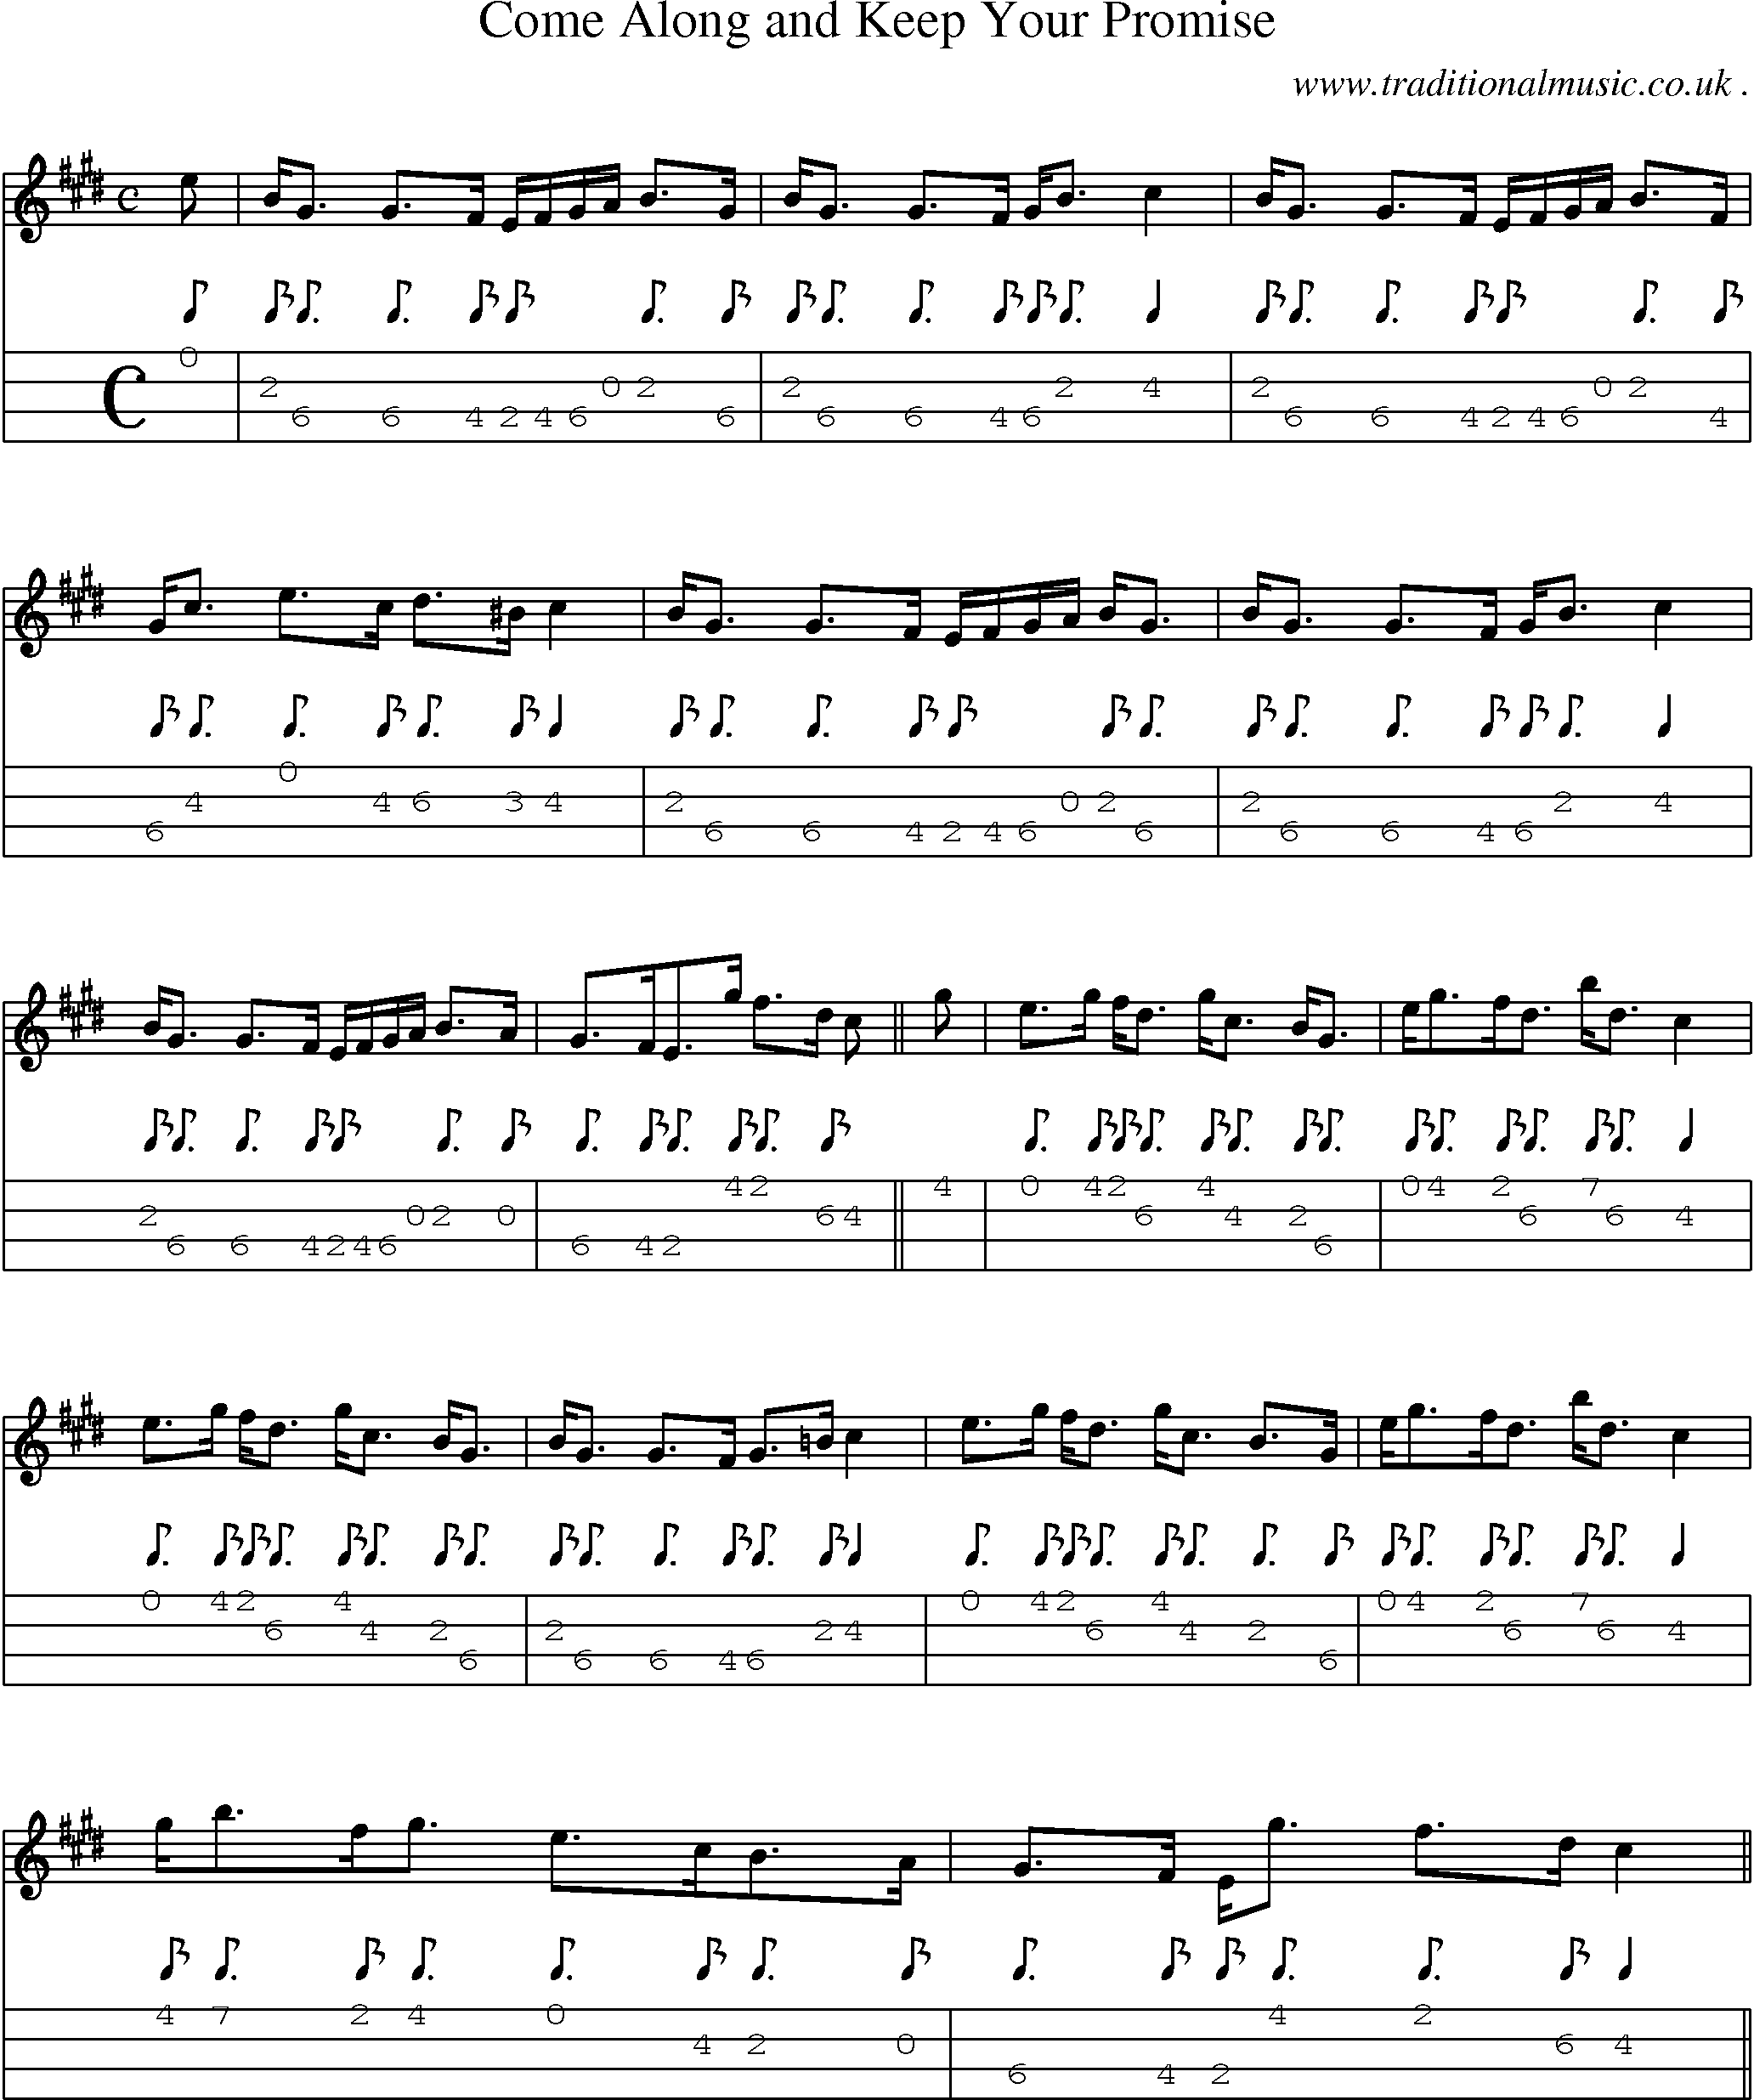 Sheet-music  score, Chords and Mandolin Tabs for Come Along And Keep Your Promise